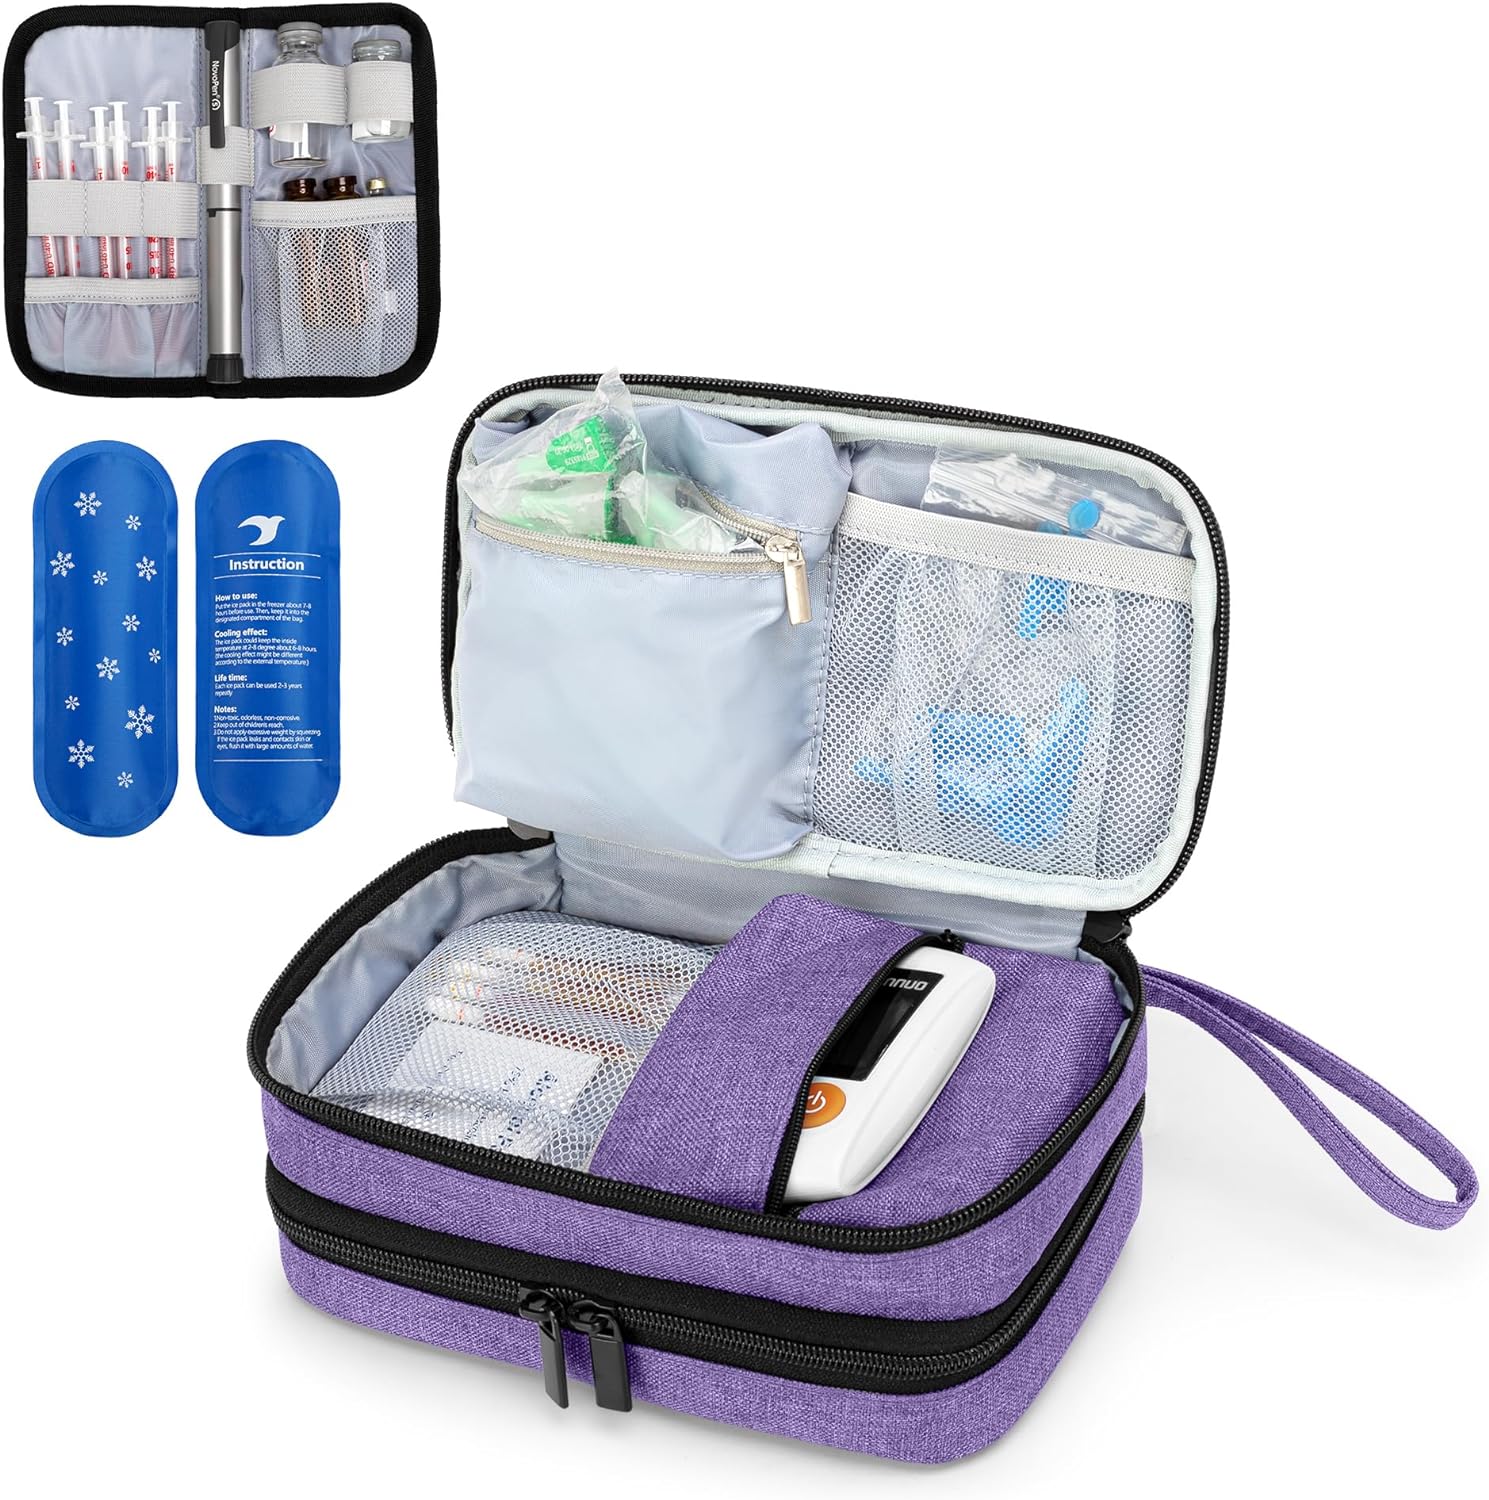 LUXJA Insulin Travel Case with 2 Ice Packs, Double Layer Diabetes Travel Case for Glucose Meter and Other Diabetic Supplies, Purple